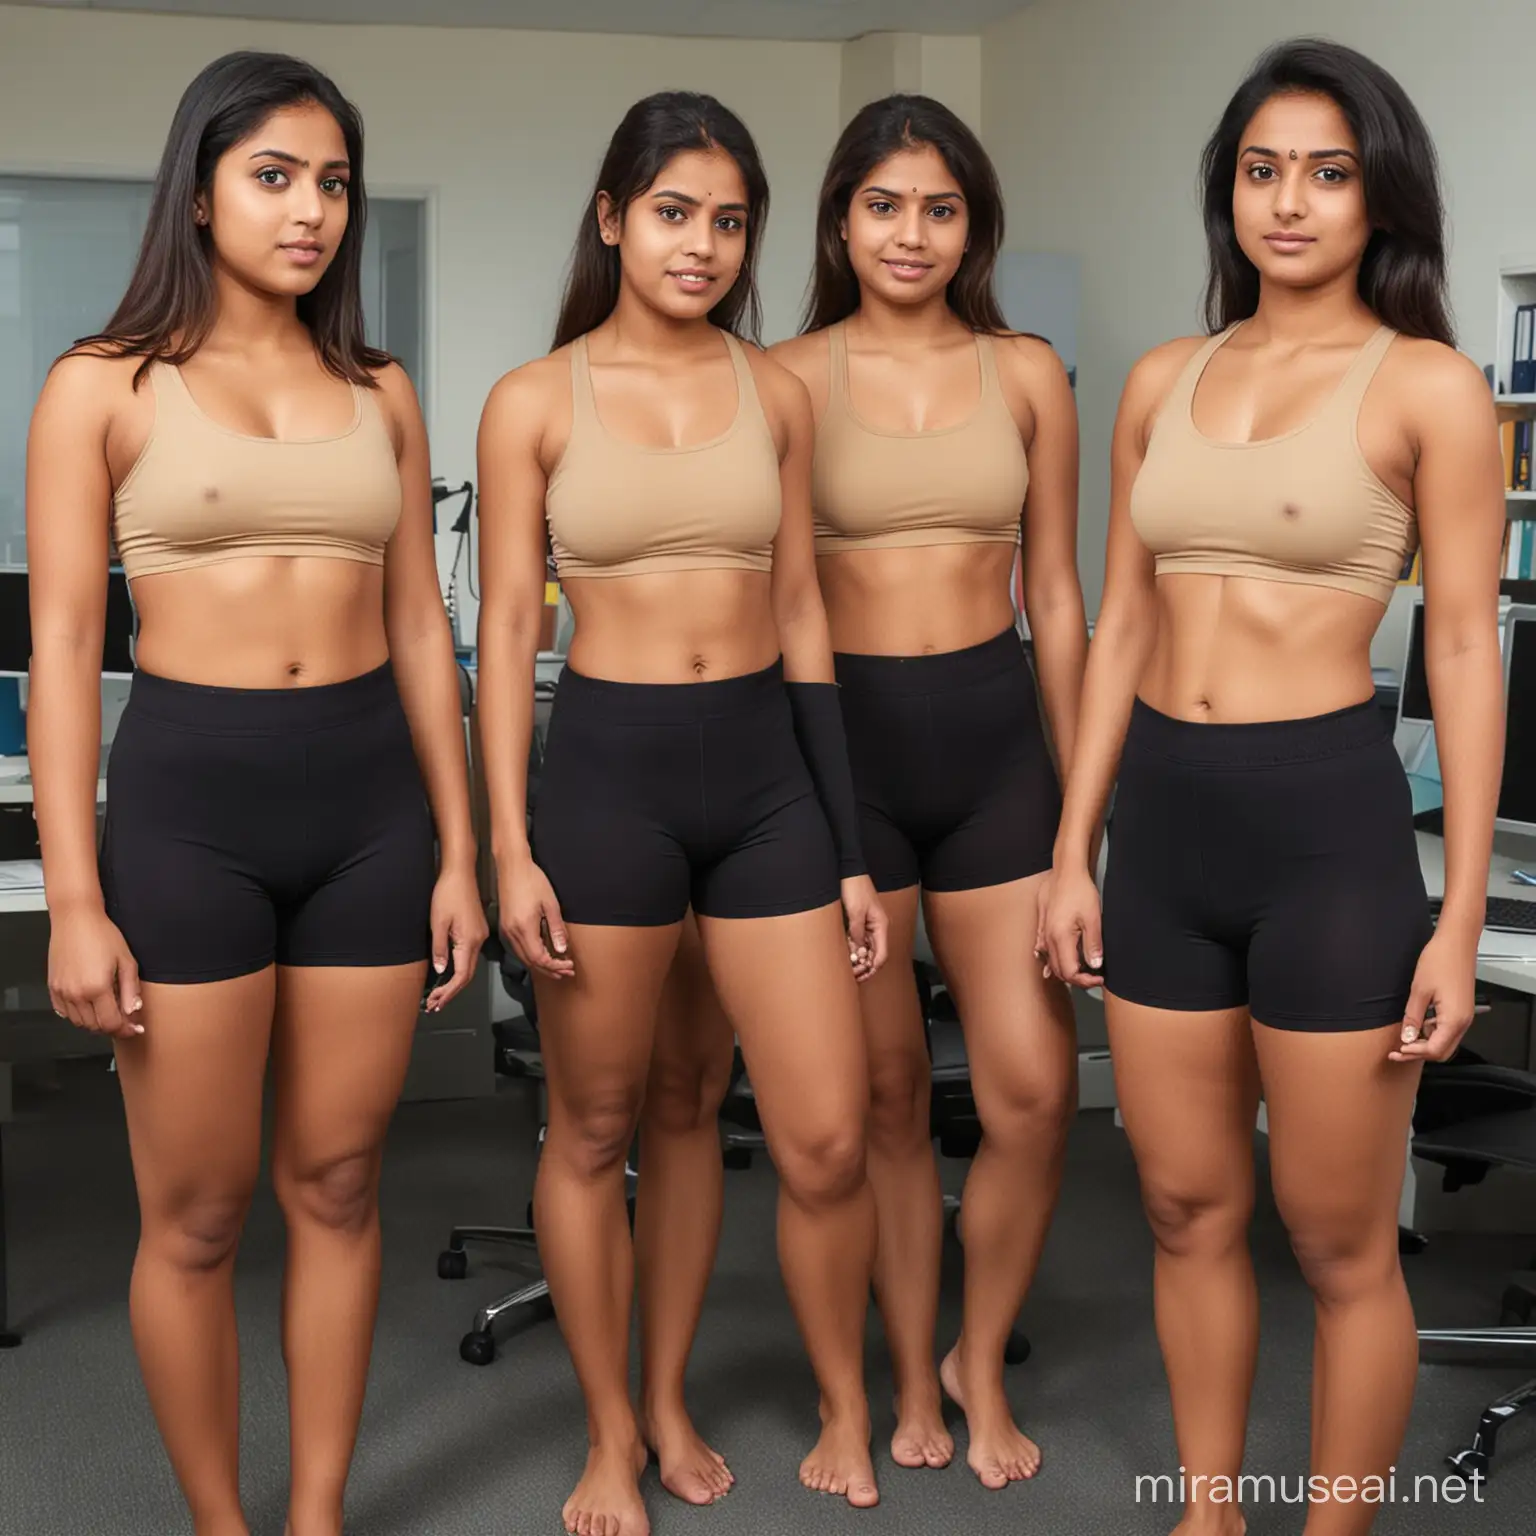 Indian Women Waiting for Boss in Office Professional Attire and Anticipation